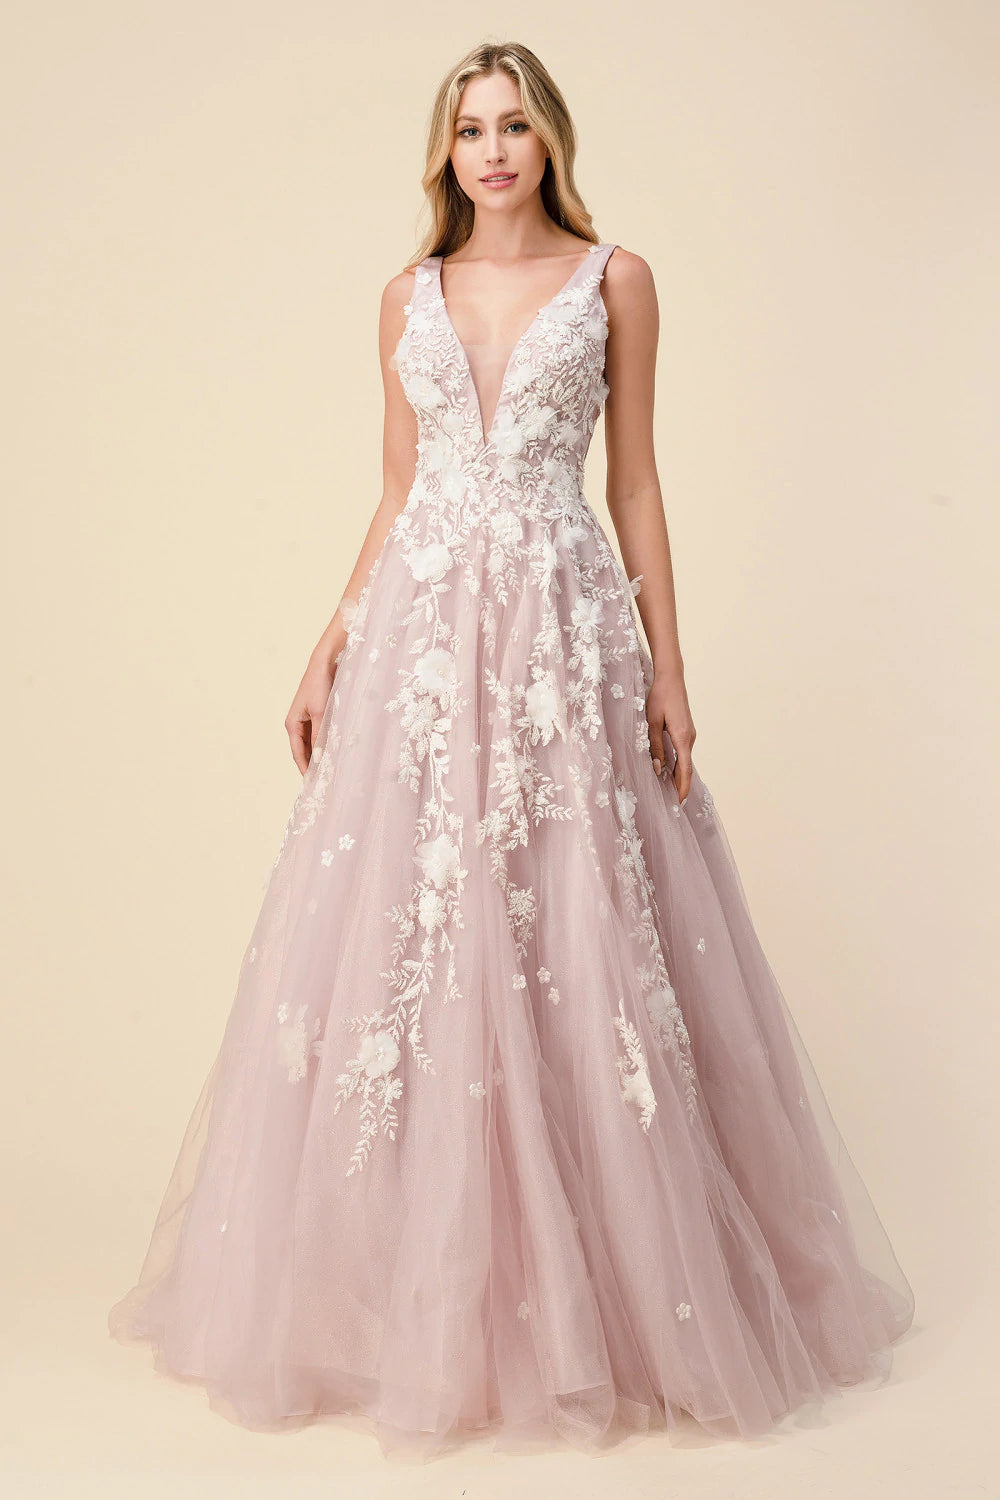 Andrea & Leo Gardenia A1028 Long Shimmer Ball Gown 3D Lace Formal Dress V Neck Gardenia gown is a layered tulle ball gown with floral diamond glitter motif trickling down the gown. 3D organza flowers add couture depth to the garment, while the pastel tone of the dress provides soft backdrop to the floral shimmer. The bodice features a illusion V-neckline with sheer side with deep V-back. The skirt is A-line shape with crinoline to support the silhouette.